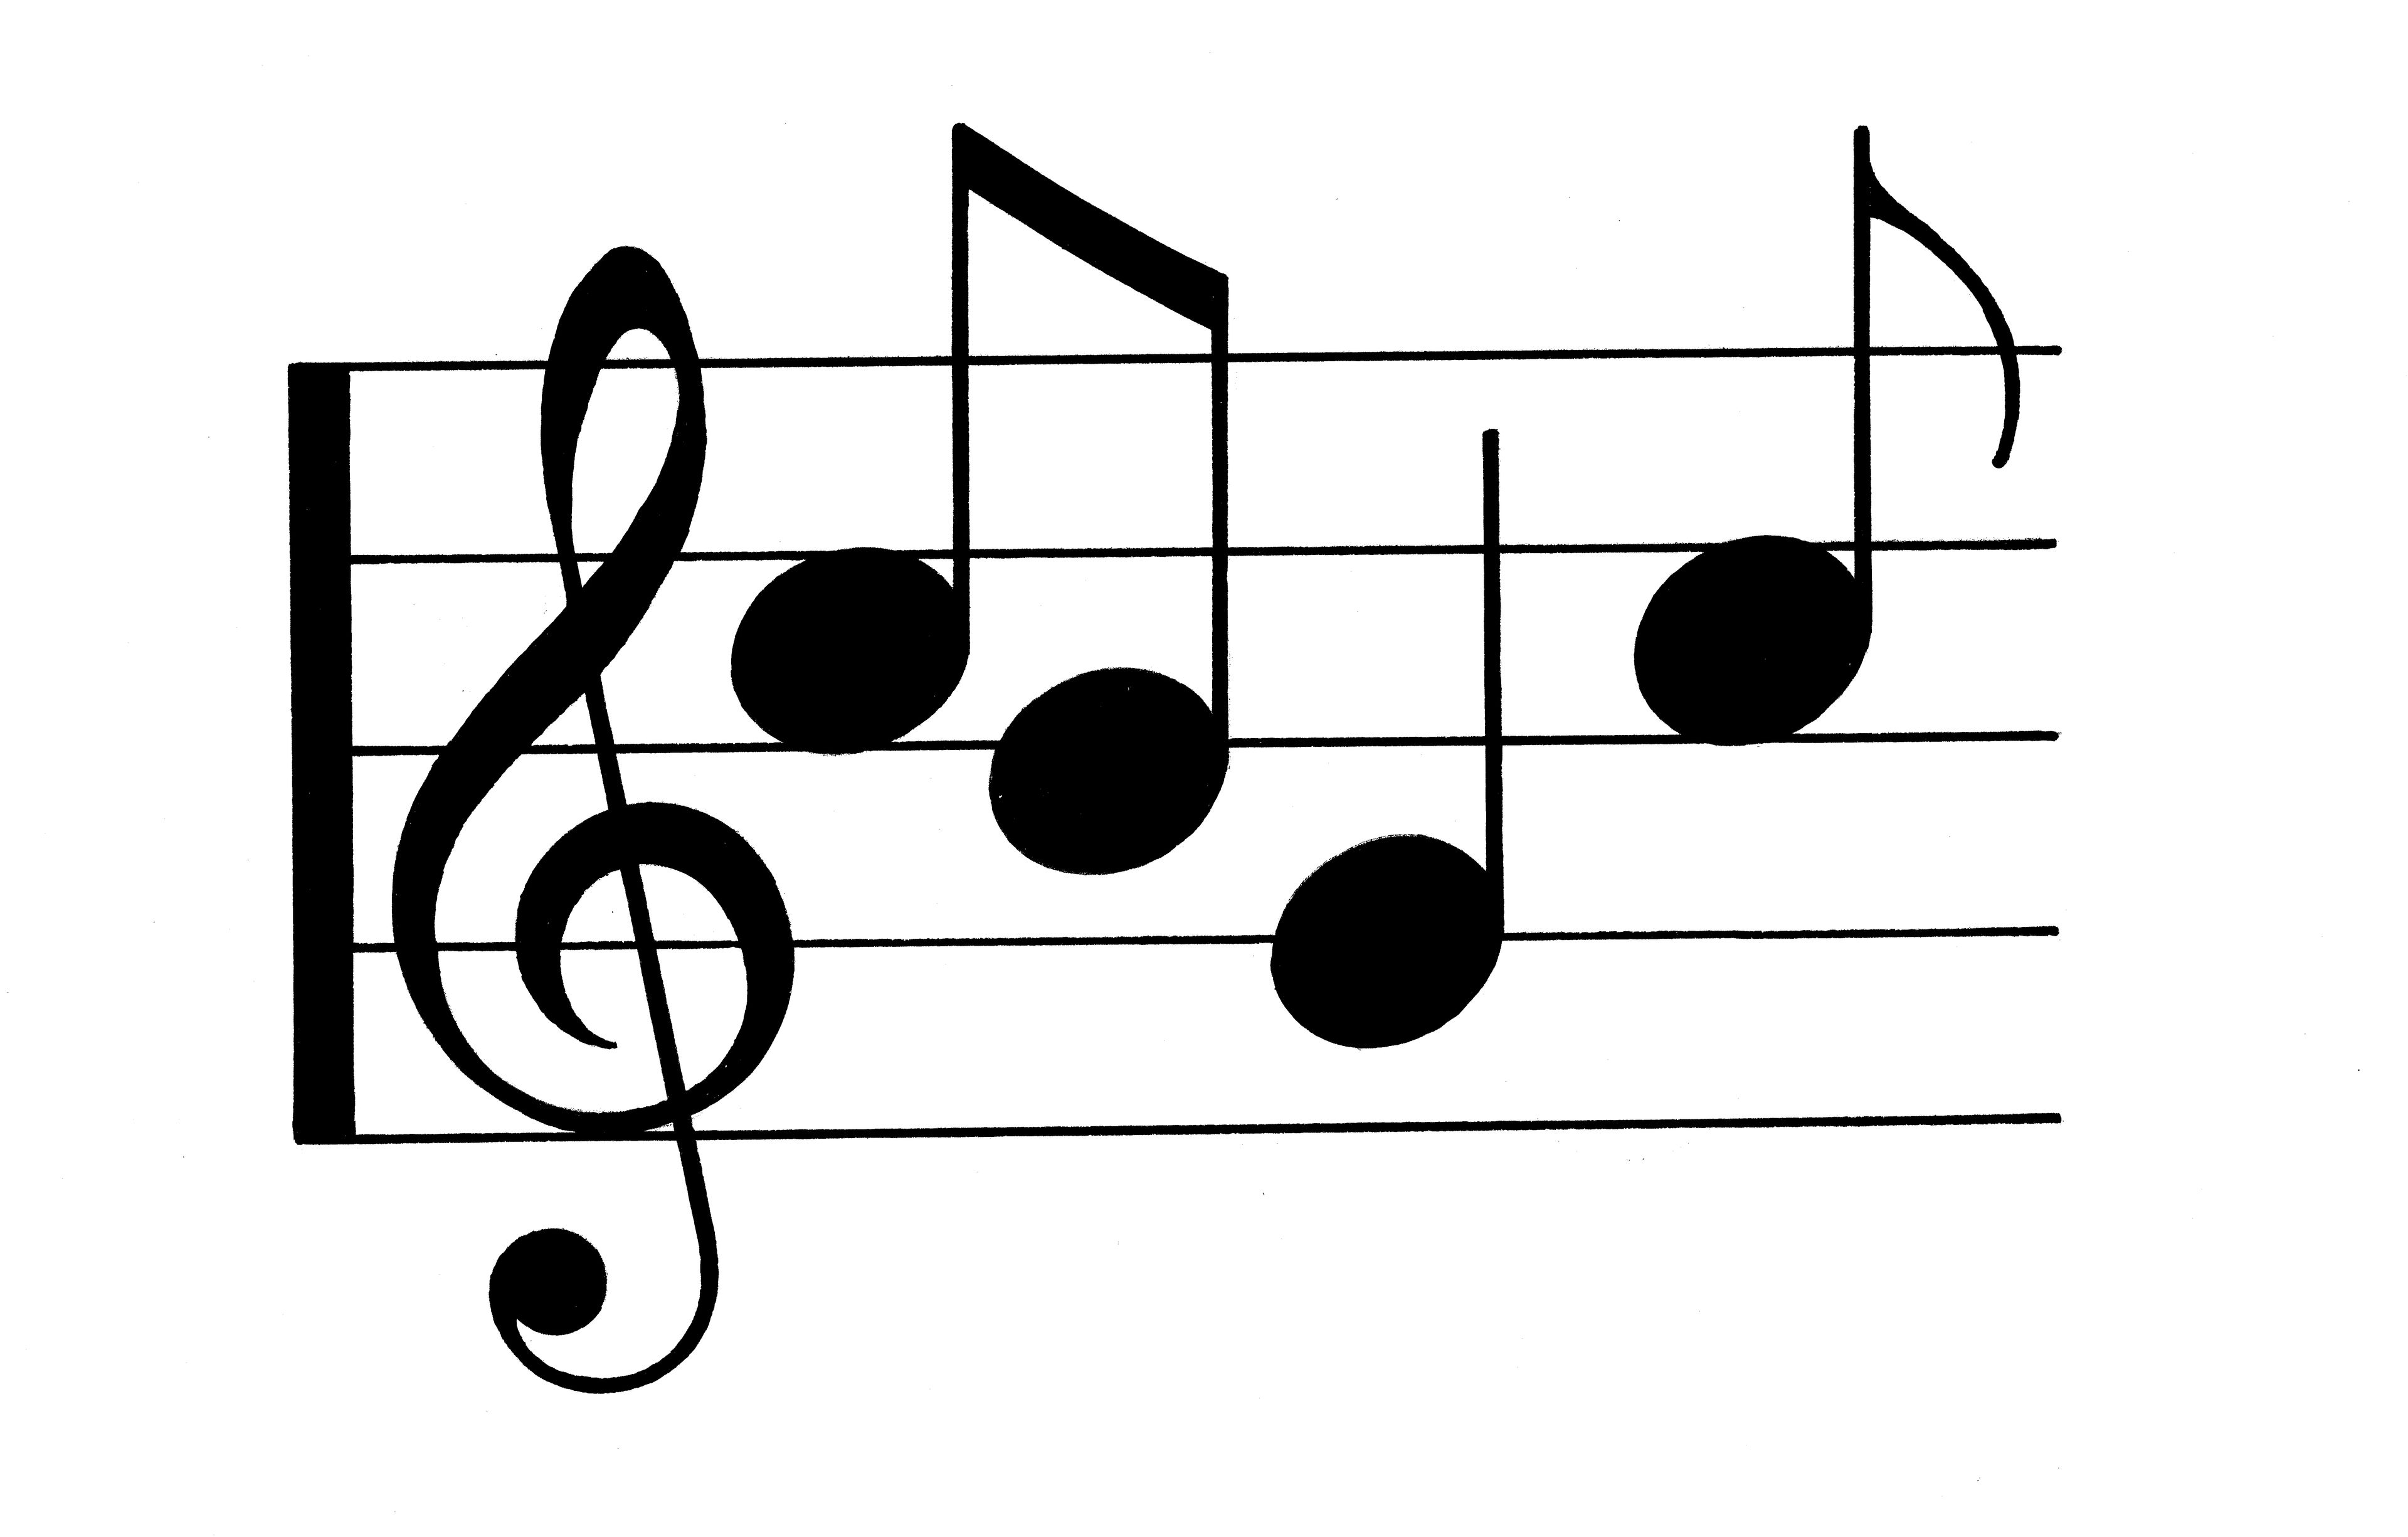 An illustration of music notes.